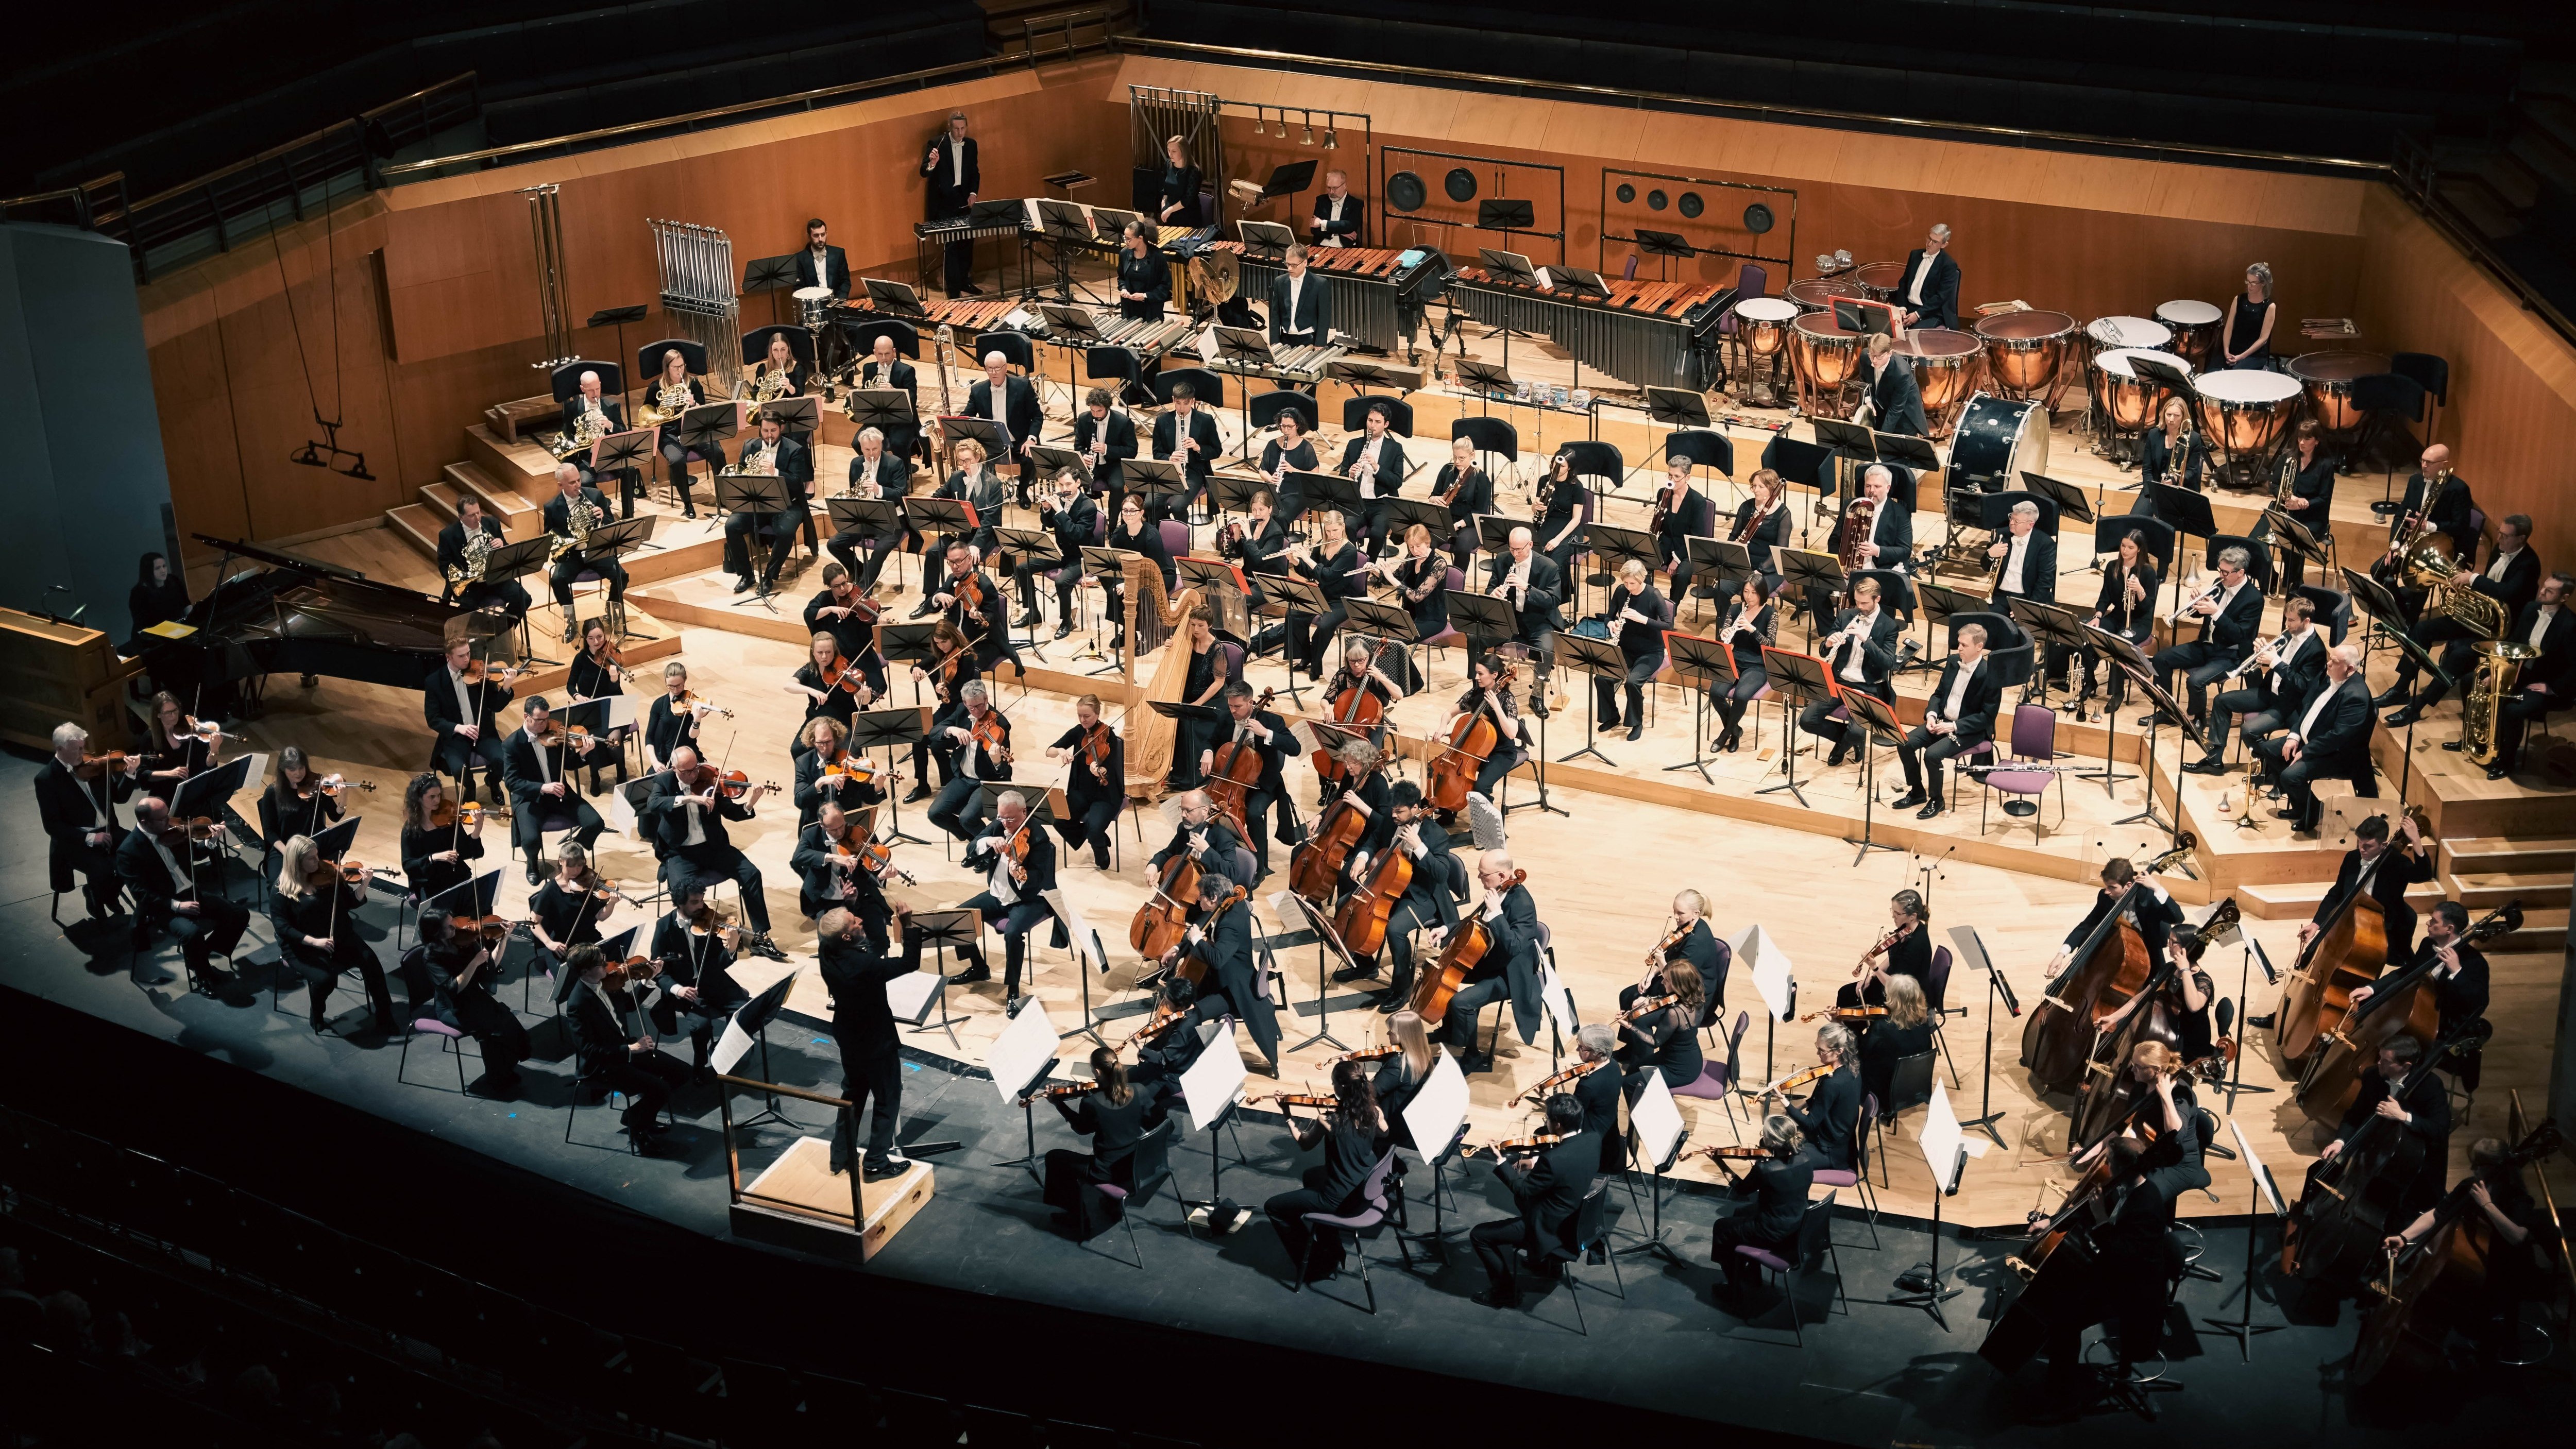 This Hallé concert renewed one’s faith in the ability of British orchestras to flourish